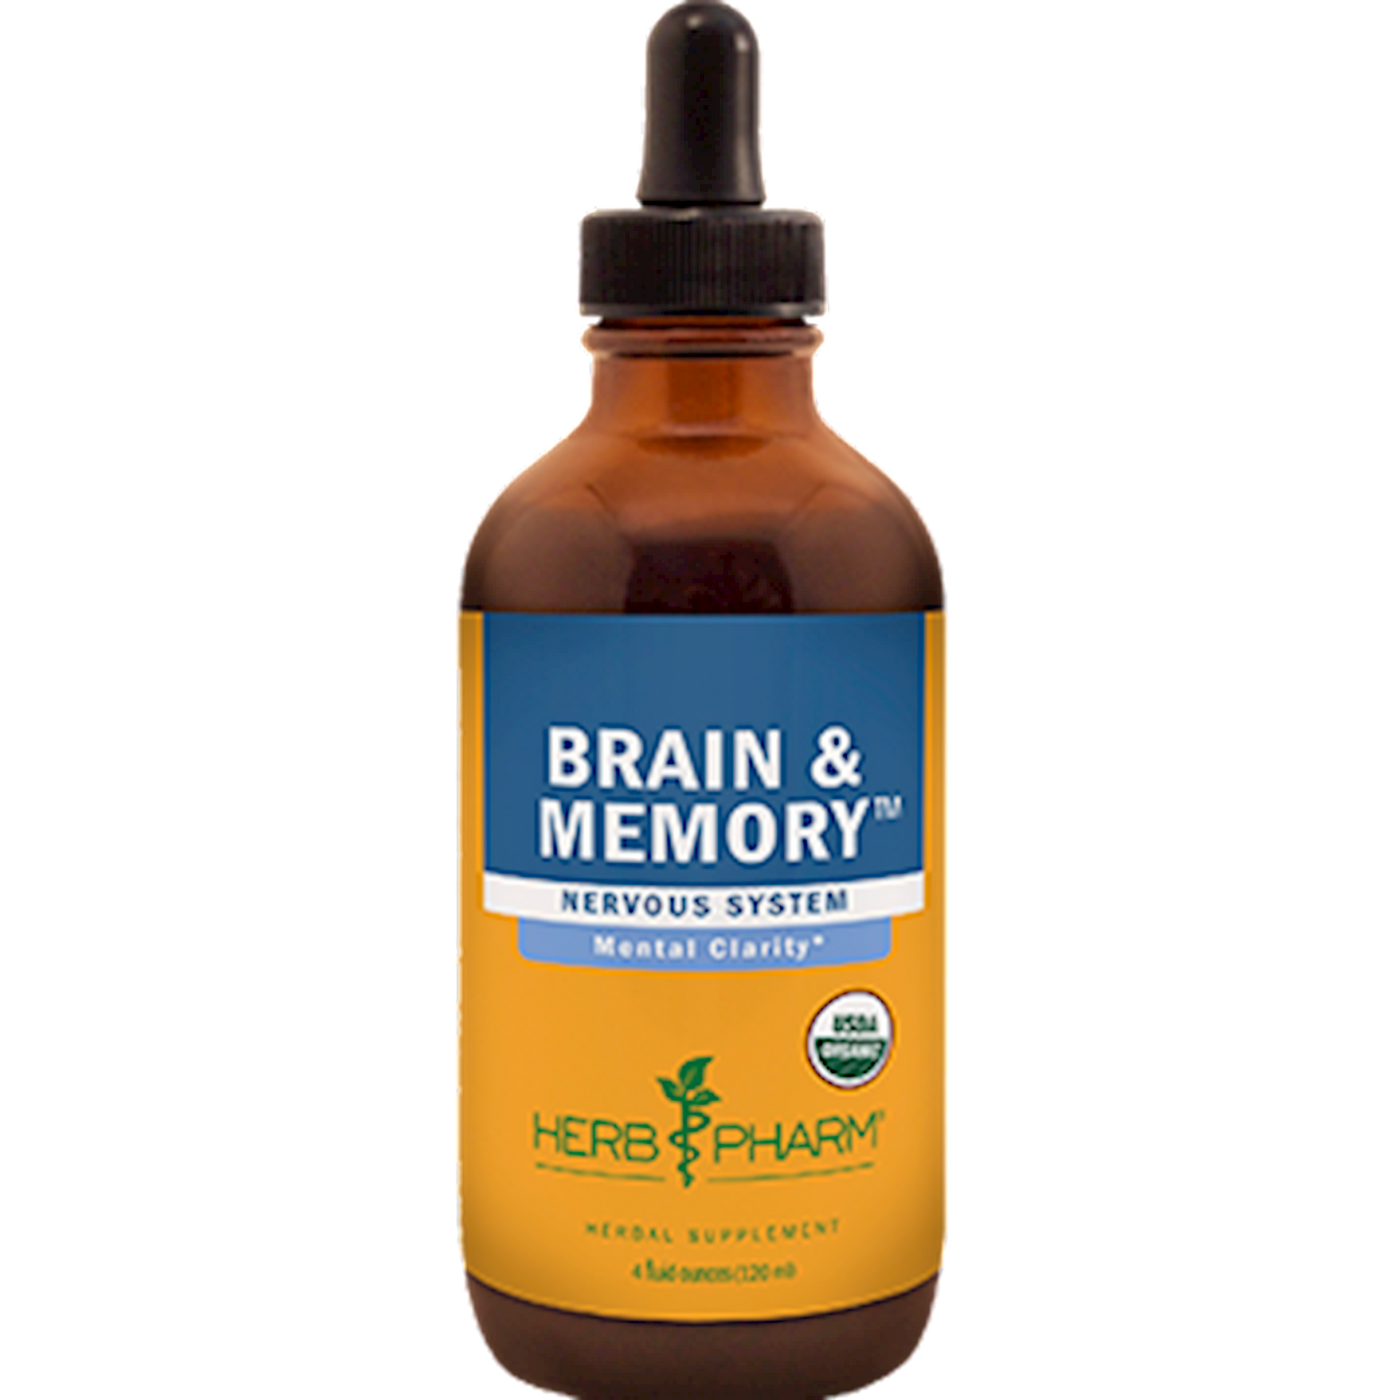 Brain & Memory Tonic* Compound  Curated Wellness